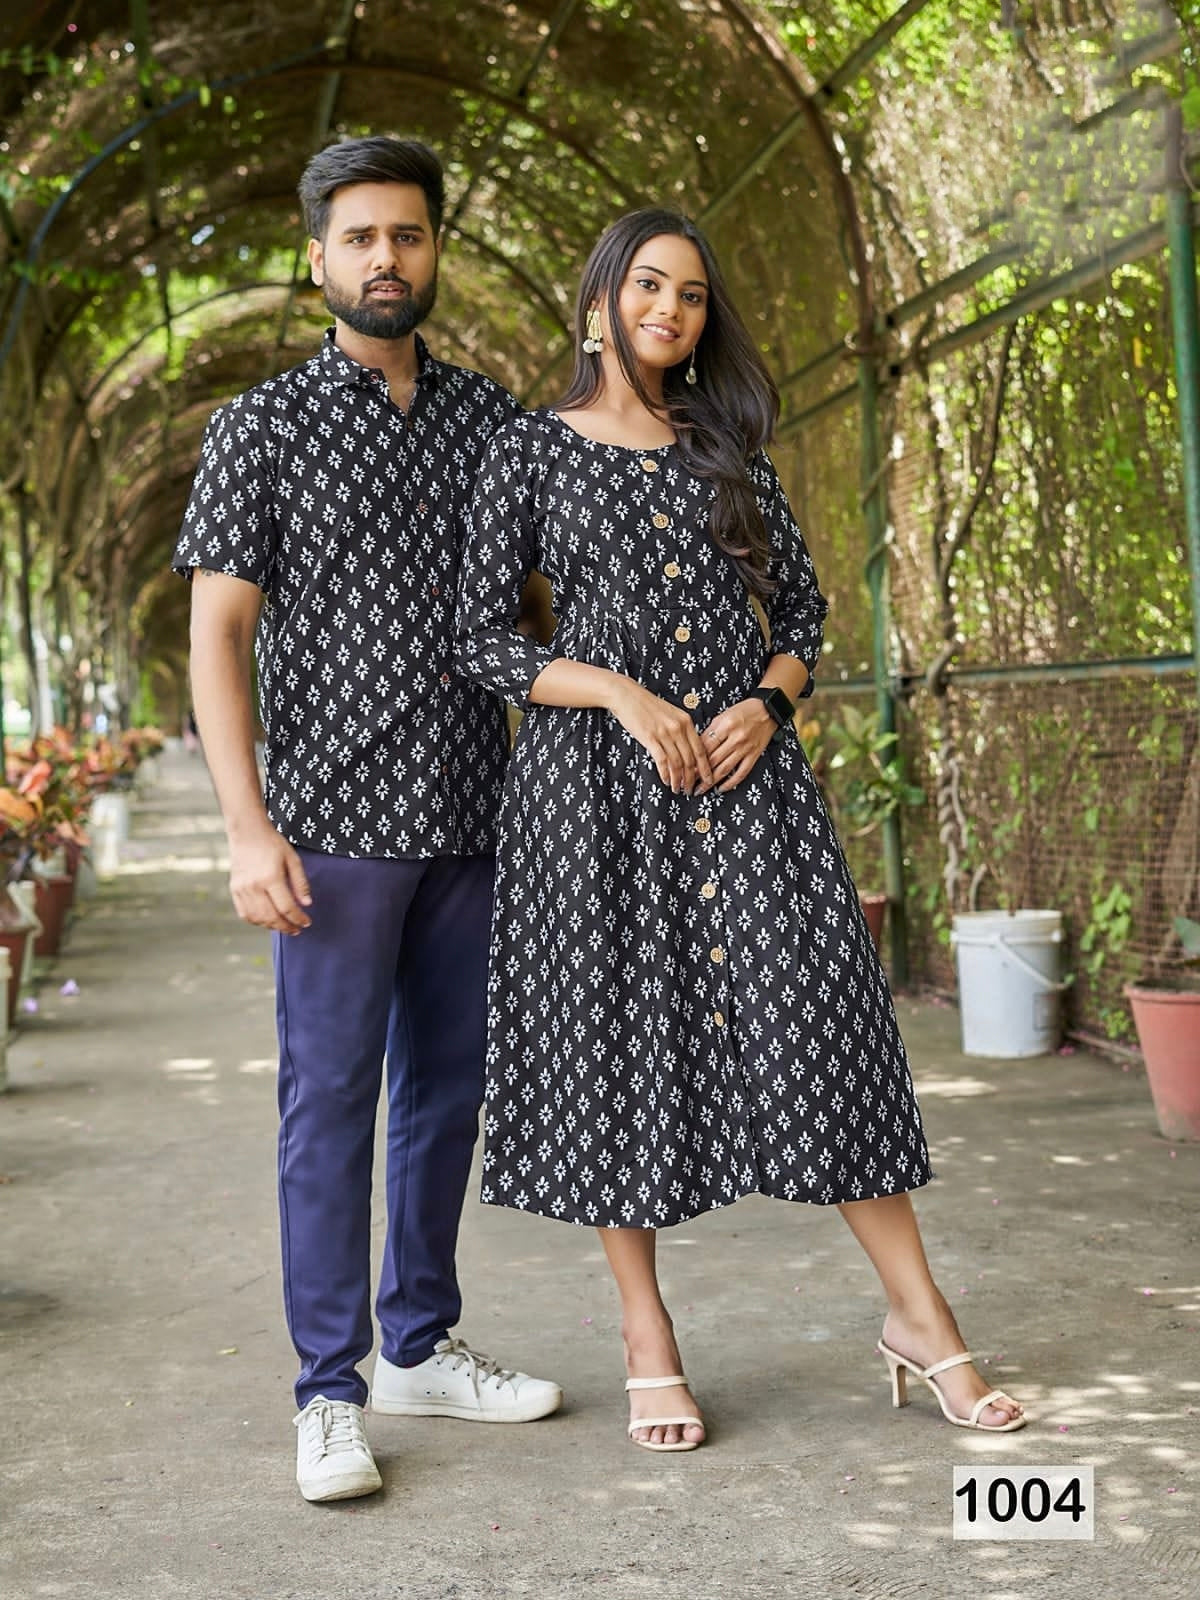 Buy Geet Creations Couples Unstitch Shirt and kurti fabric at Amazon.in